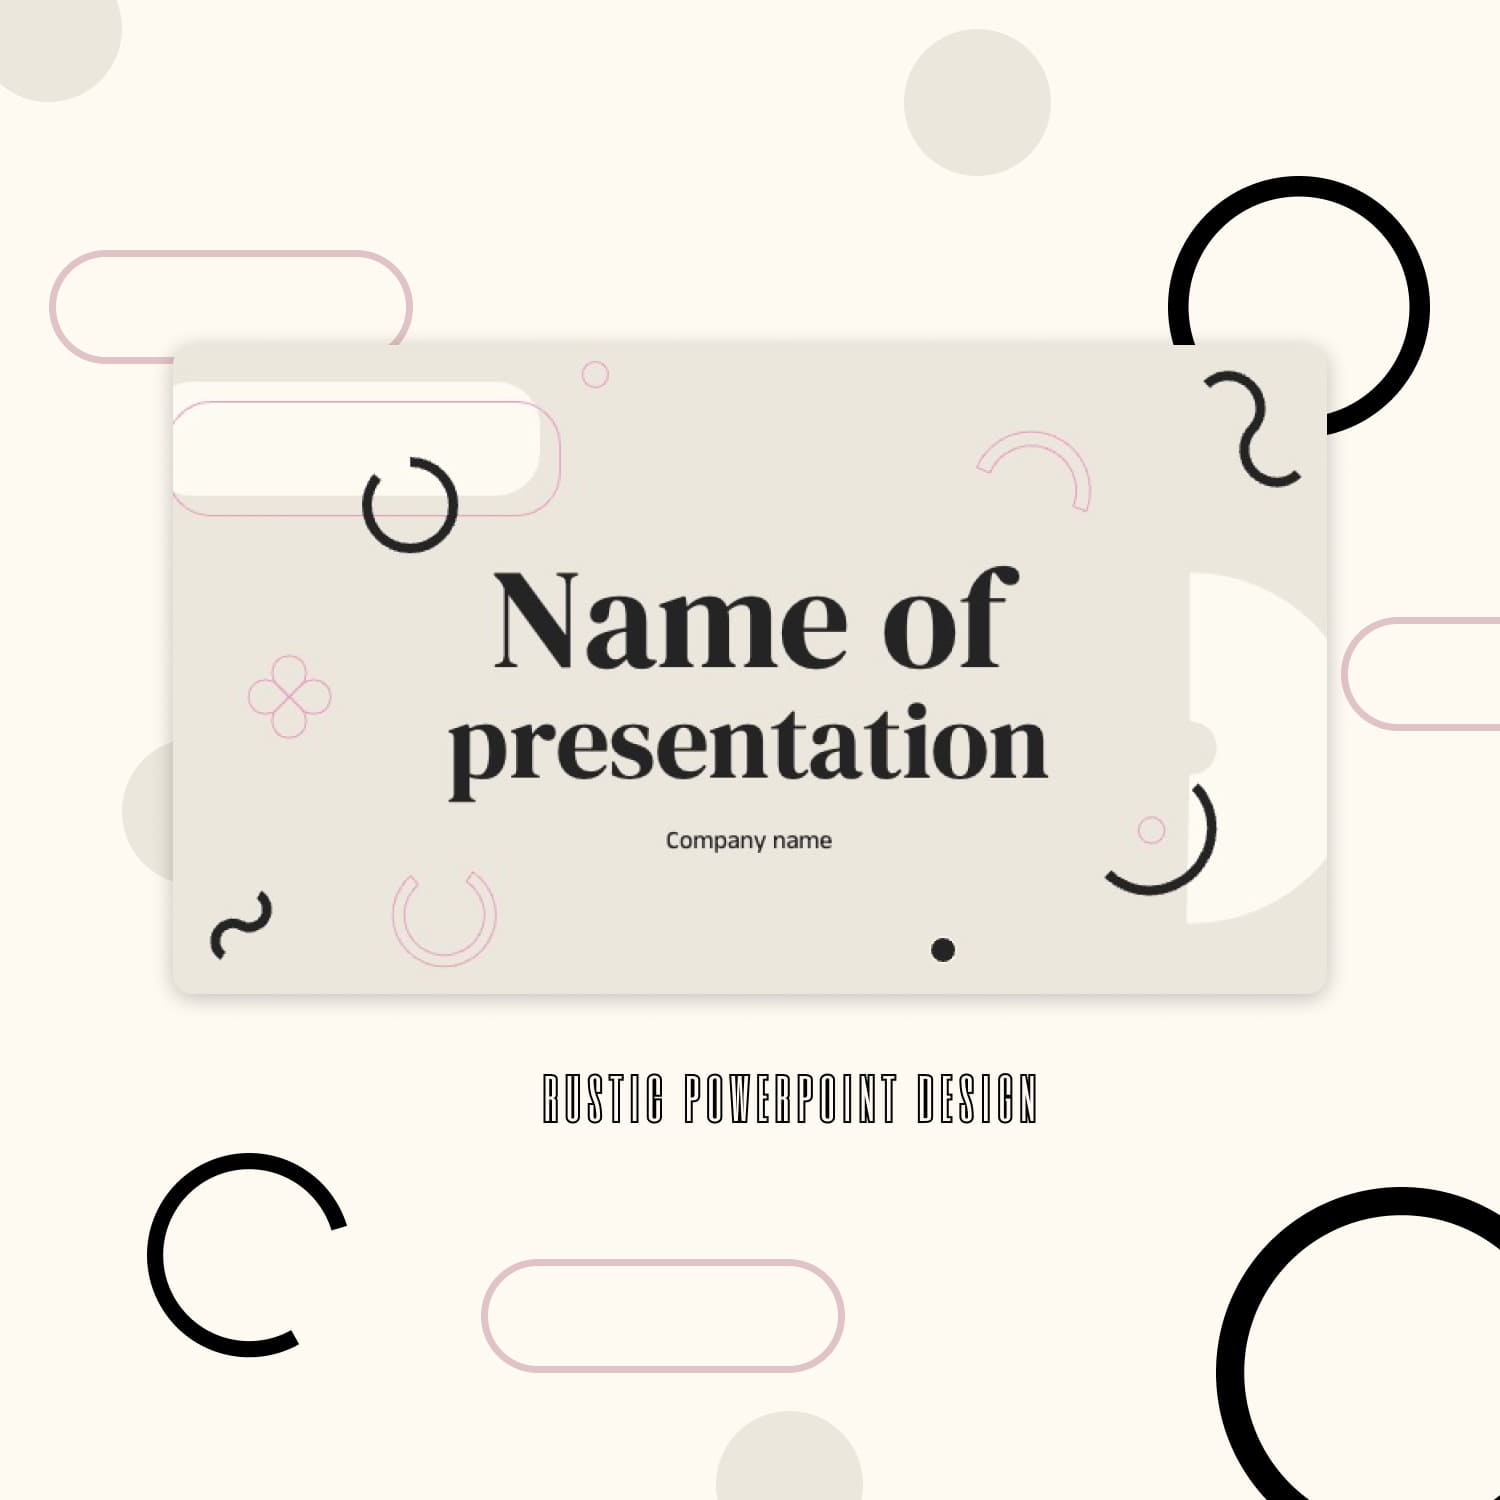 Rustic Powerpoint Design cover image.